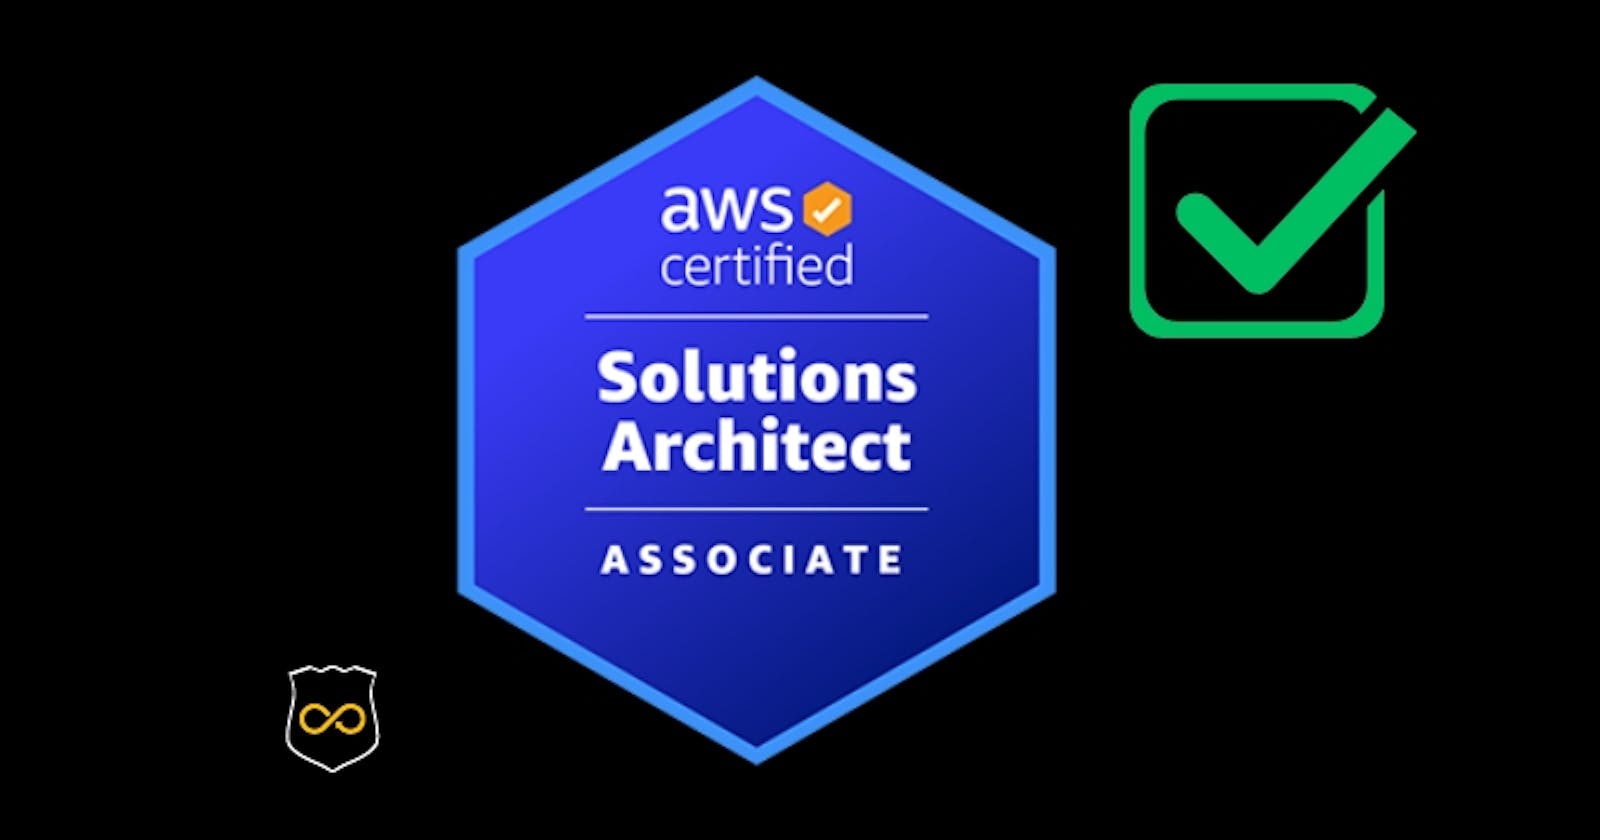 My Journey to Passing the AWS Certified Solutions Architect Associate Exam